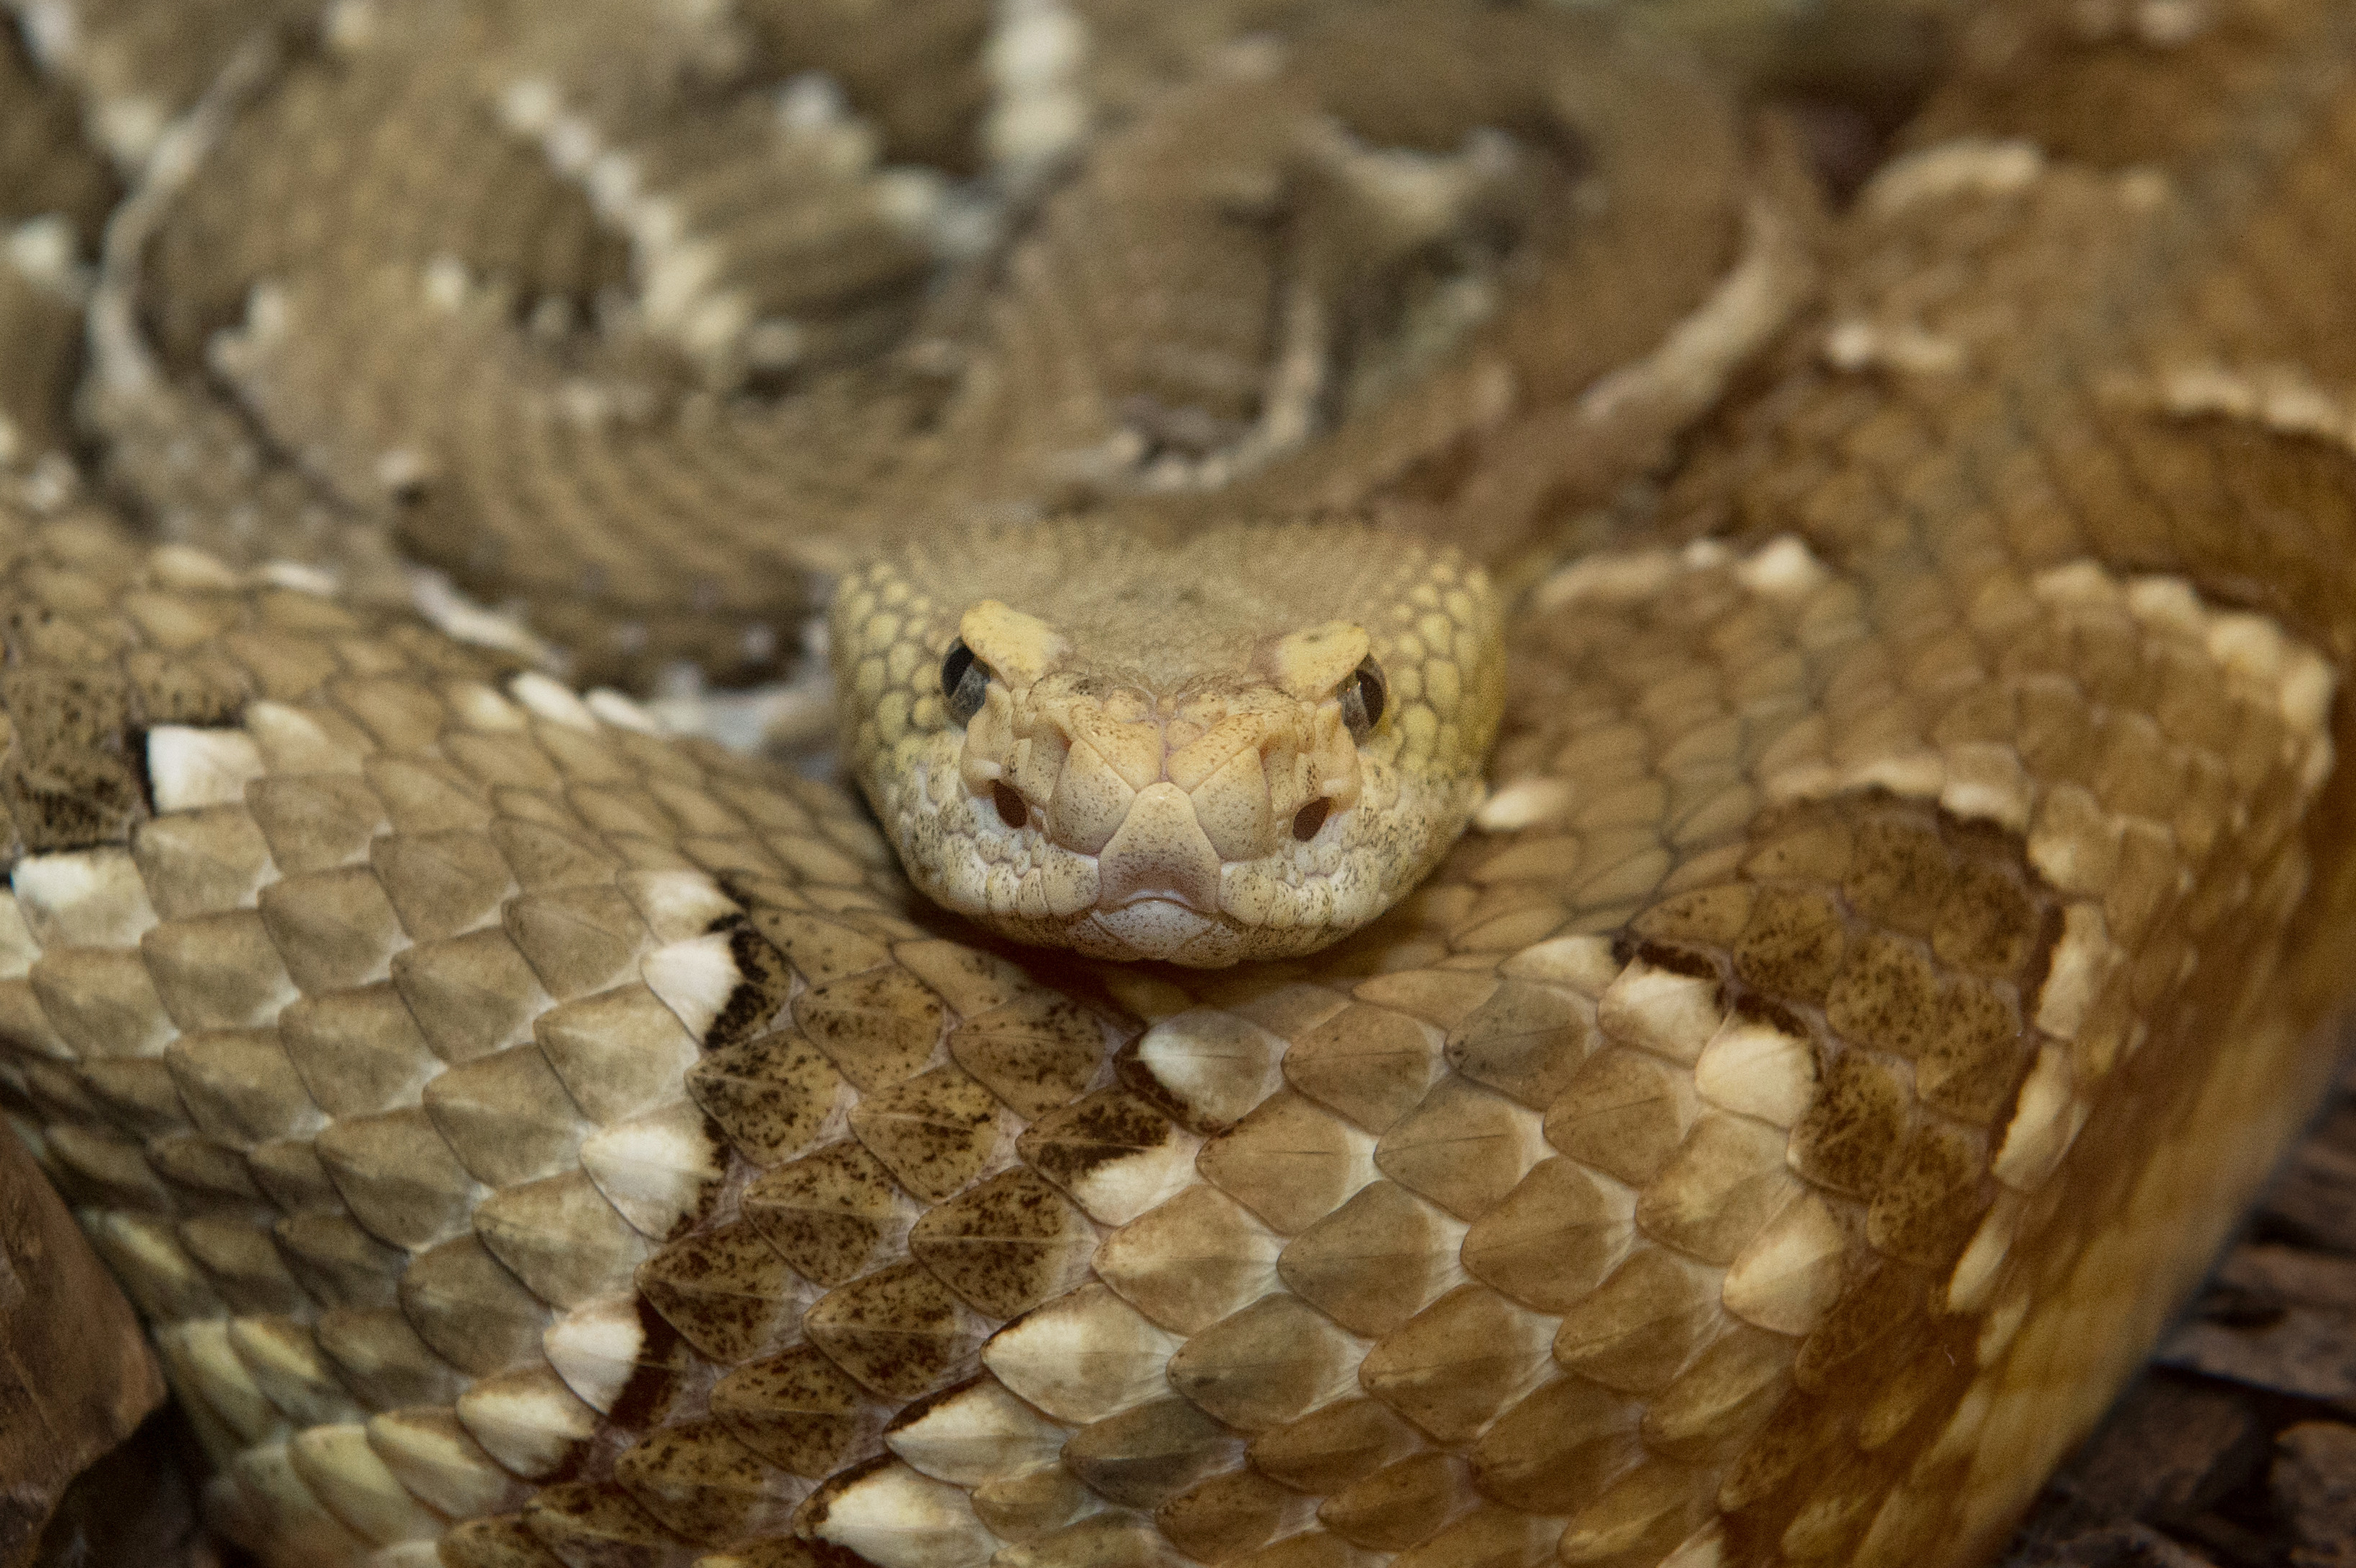 Is a Rattlesnake a Pit Viper?